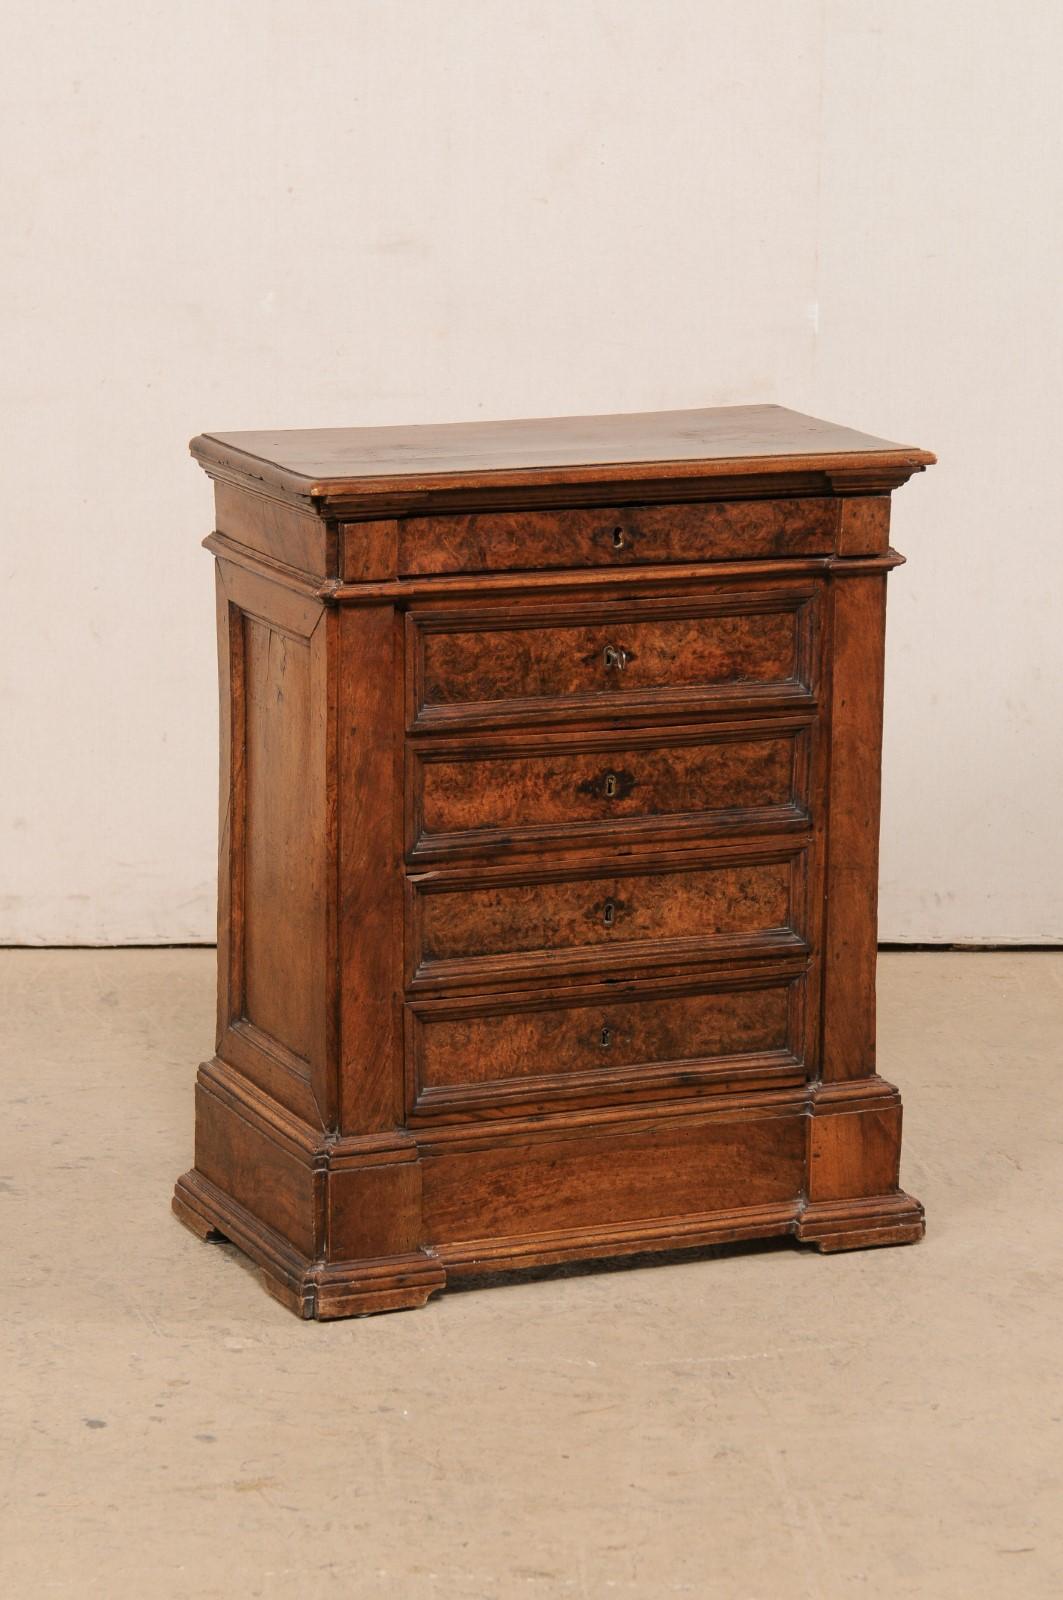 An Italian small-sized walnut chest with burl veneers from the 19th century. This antique commode from Italy has been made of walnut wood with beautiful burl wood veneers adorning the drawer fronts. The rectangular-shaped top sits about a case which